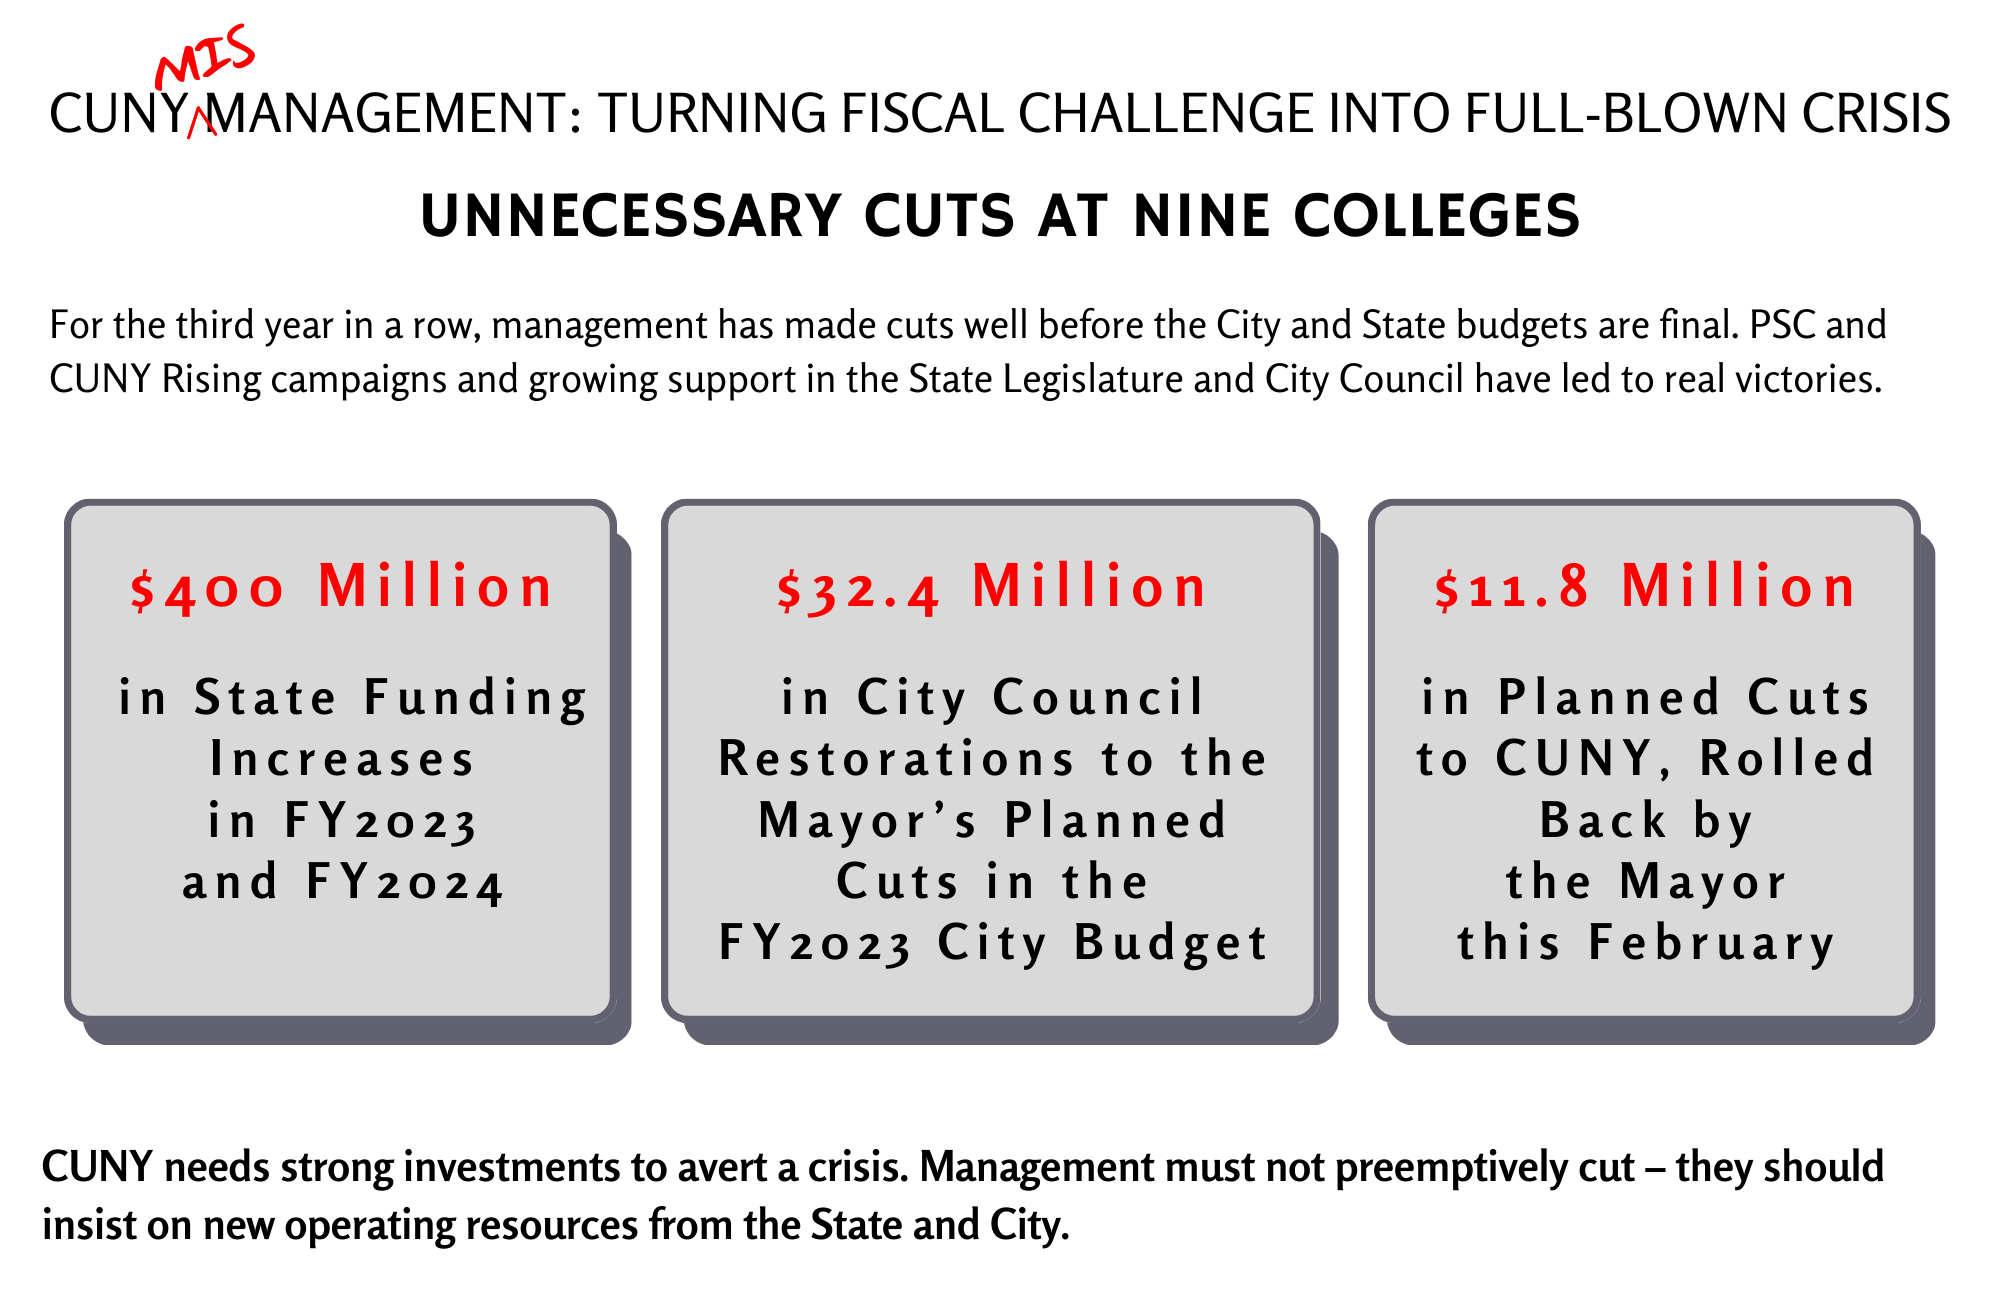 For the third year in a row, management has made cuts well before the City and State budgets are final. PSC and CUNY Rising campaigns and growing support in the State Legislature and City Council have led to real victories.